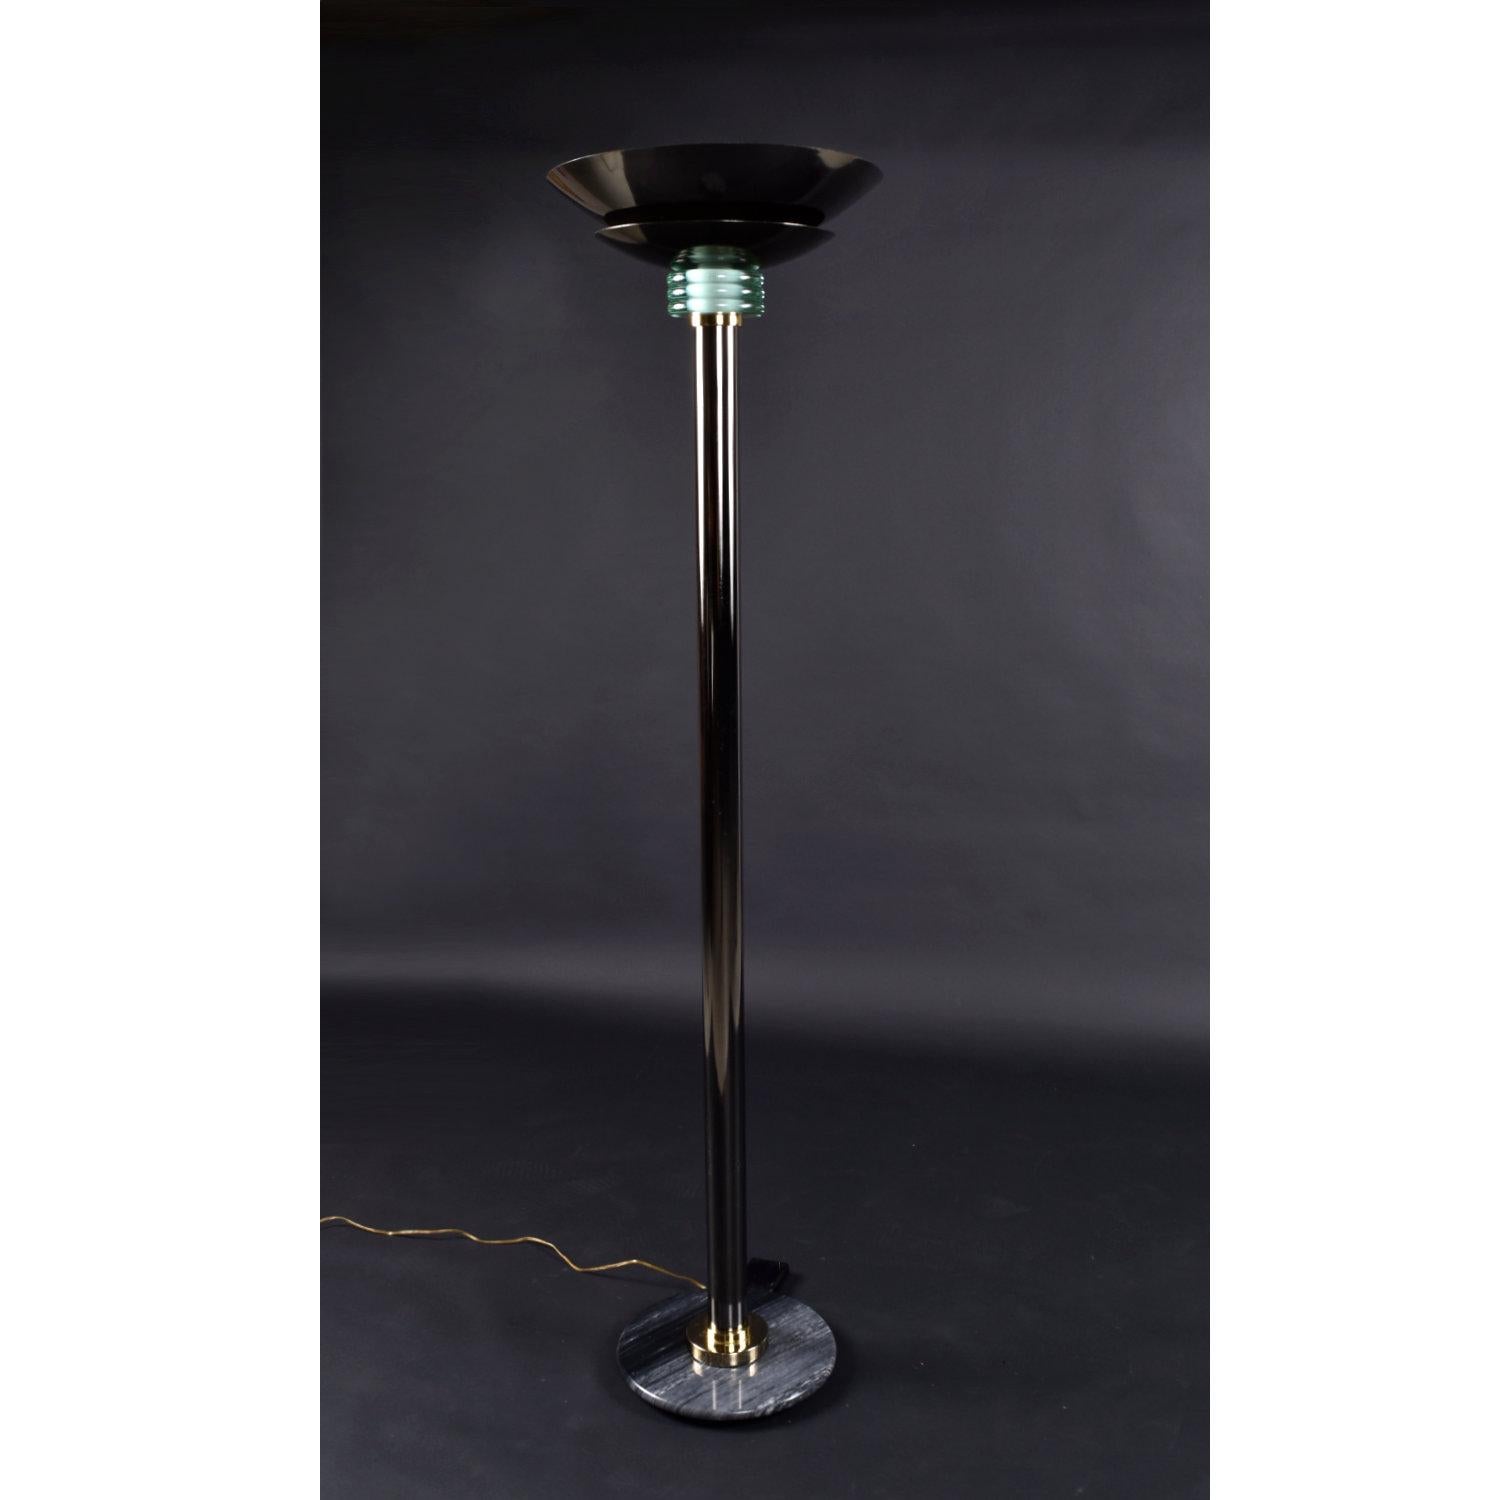 Elegant Casablanca Lighting torchiere lamp with gold mirrored finish. This stunning lamp is nearly six feet tall. Light beams from the top of the torchiere style floor lamp. Control the illumination using the dimmer switch on the base. The sexy